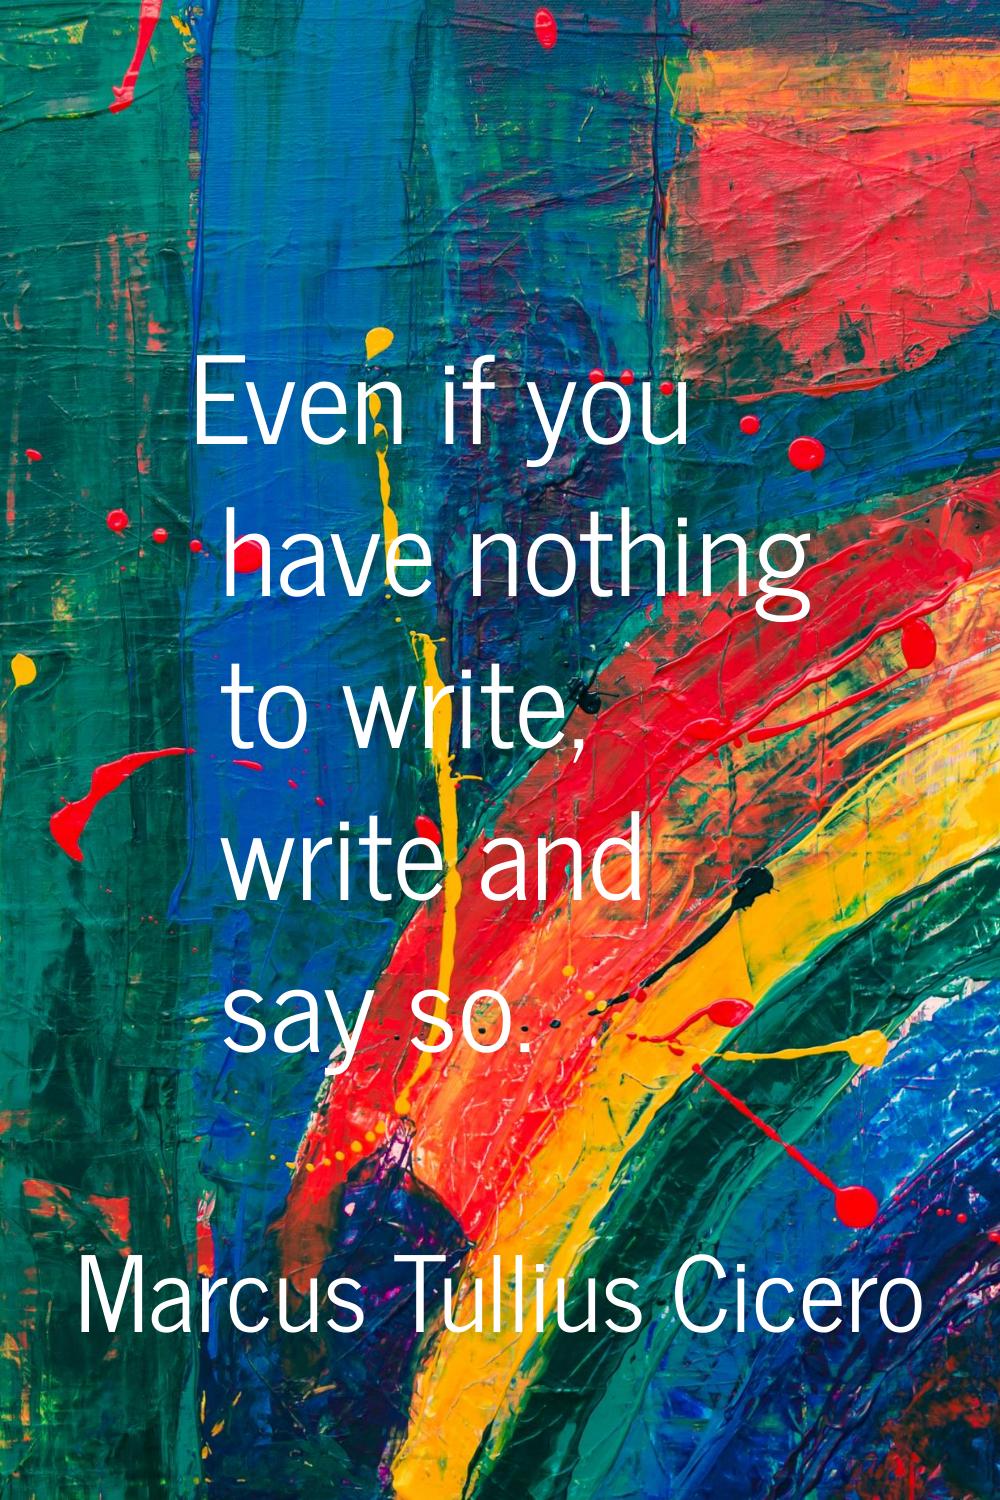 Even if you have nothing to write, write and say so.